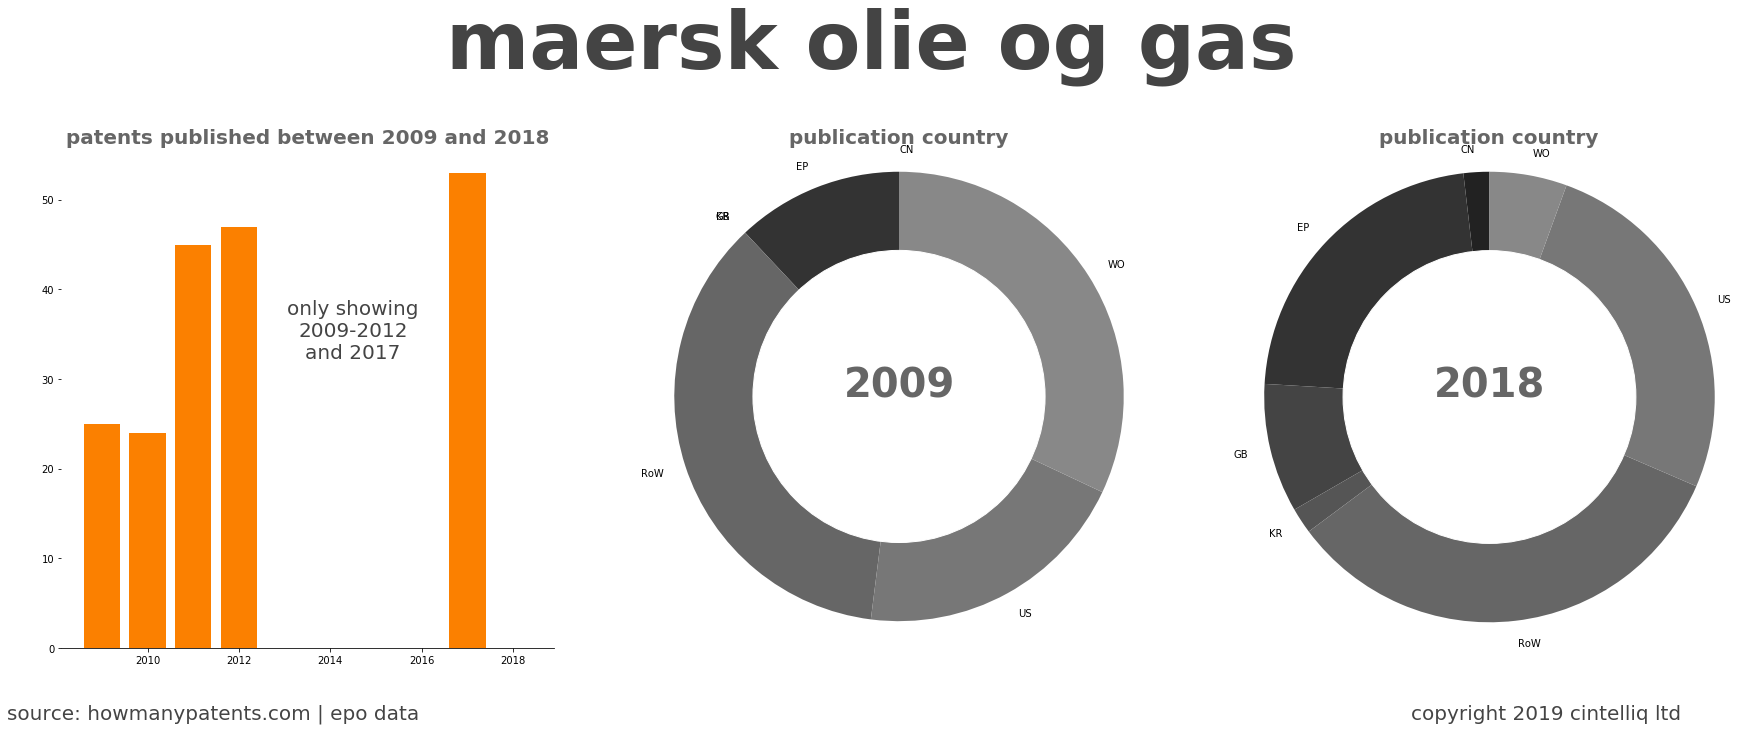 summary of patents for Maersk Olie Og Gas